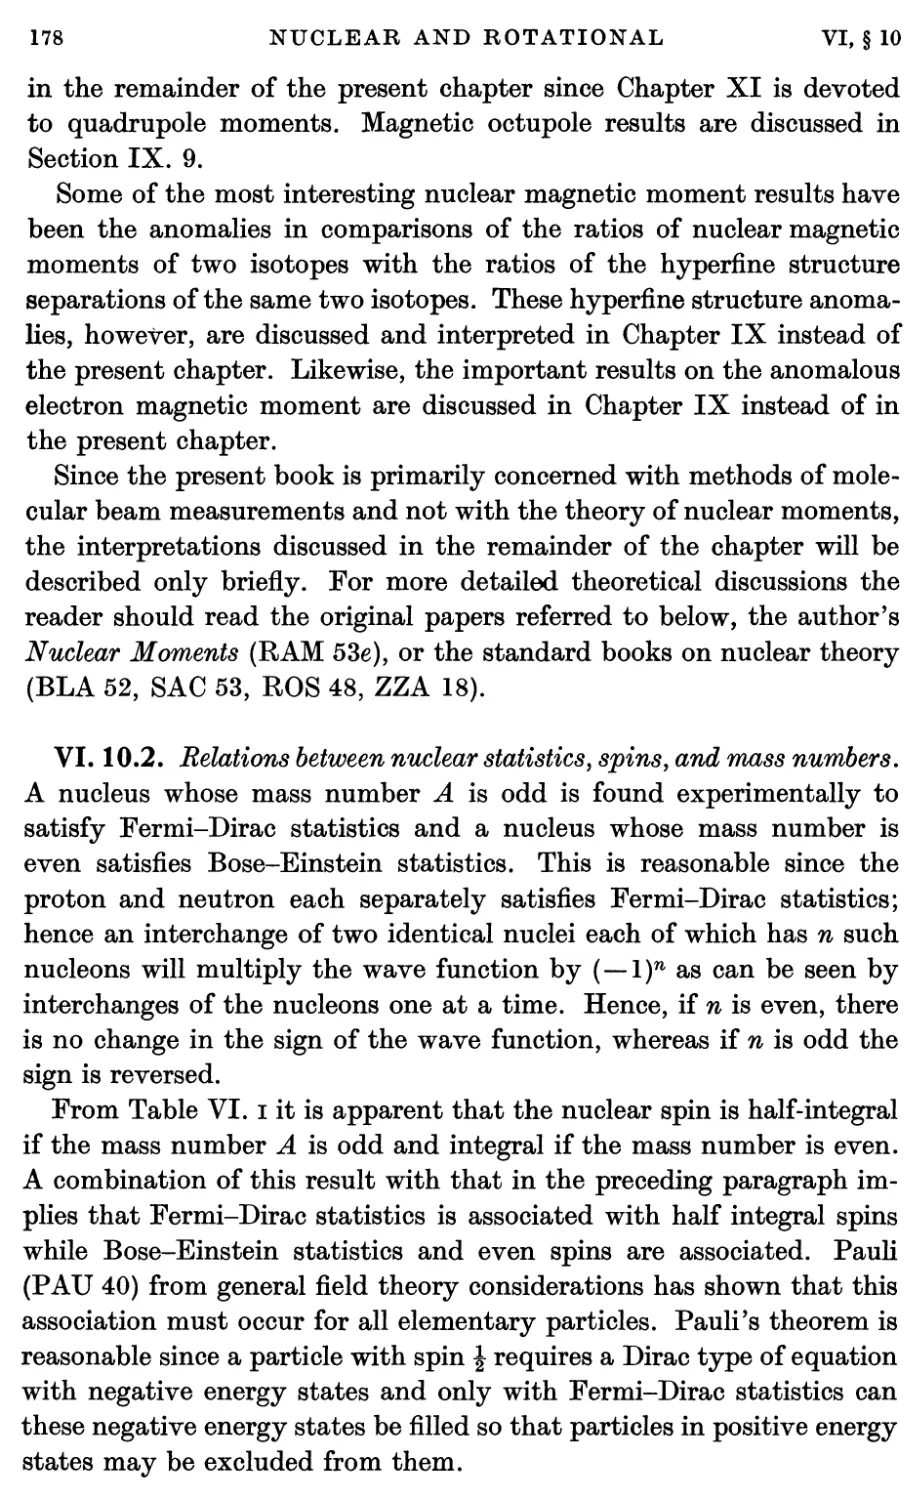 VI.10.2. Relations between nuclear statistics, spins, and mass numbers